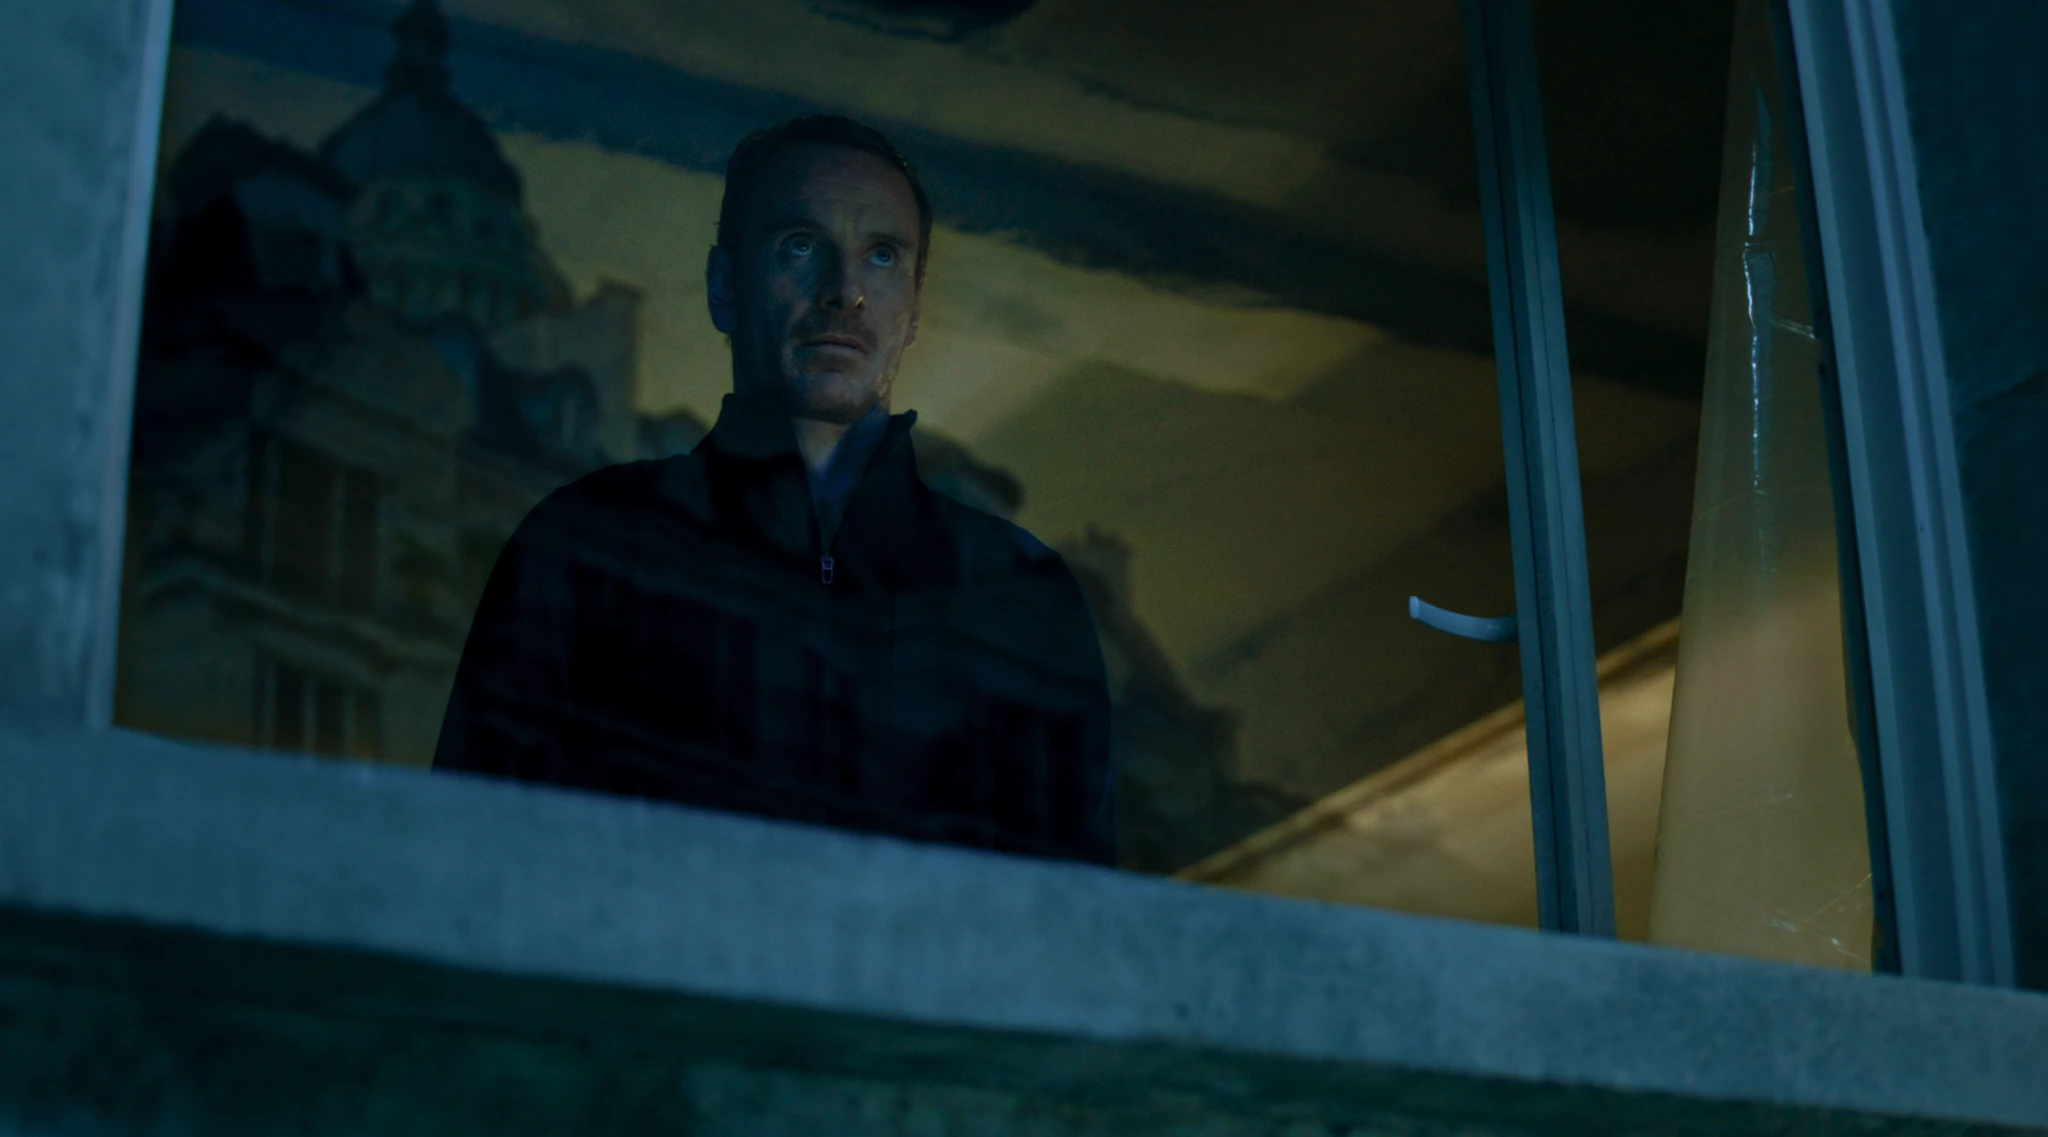 'The Killer' Trailer: David Fincher Casts Michael Fassbender as a Killer With a Conscience